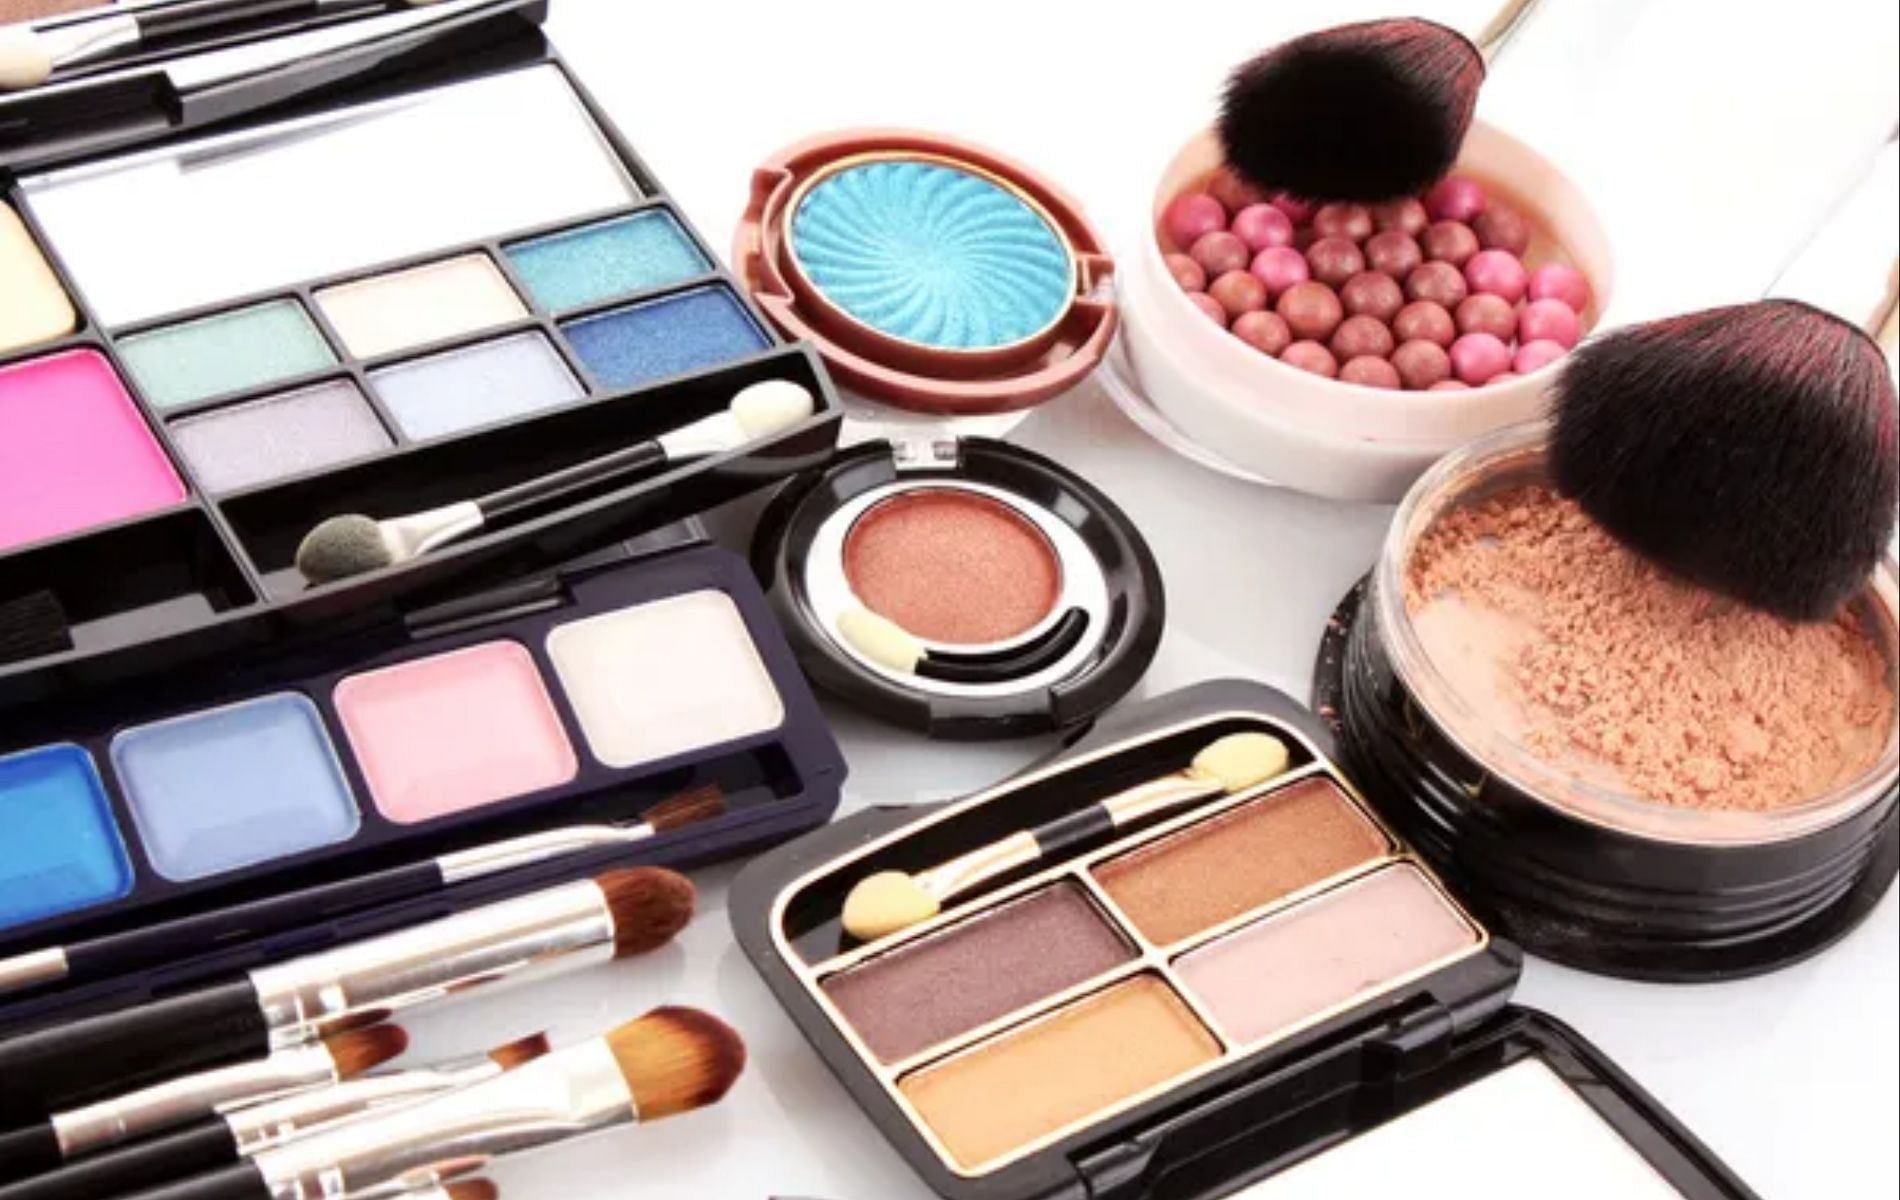 Heavy makeup clogs pores especially in humid weather (Image via Depositphotos)